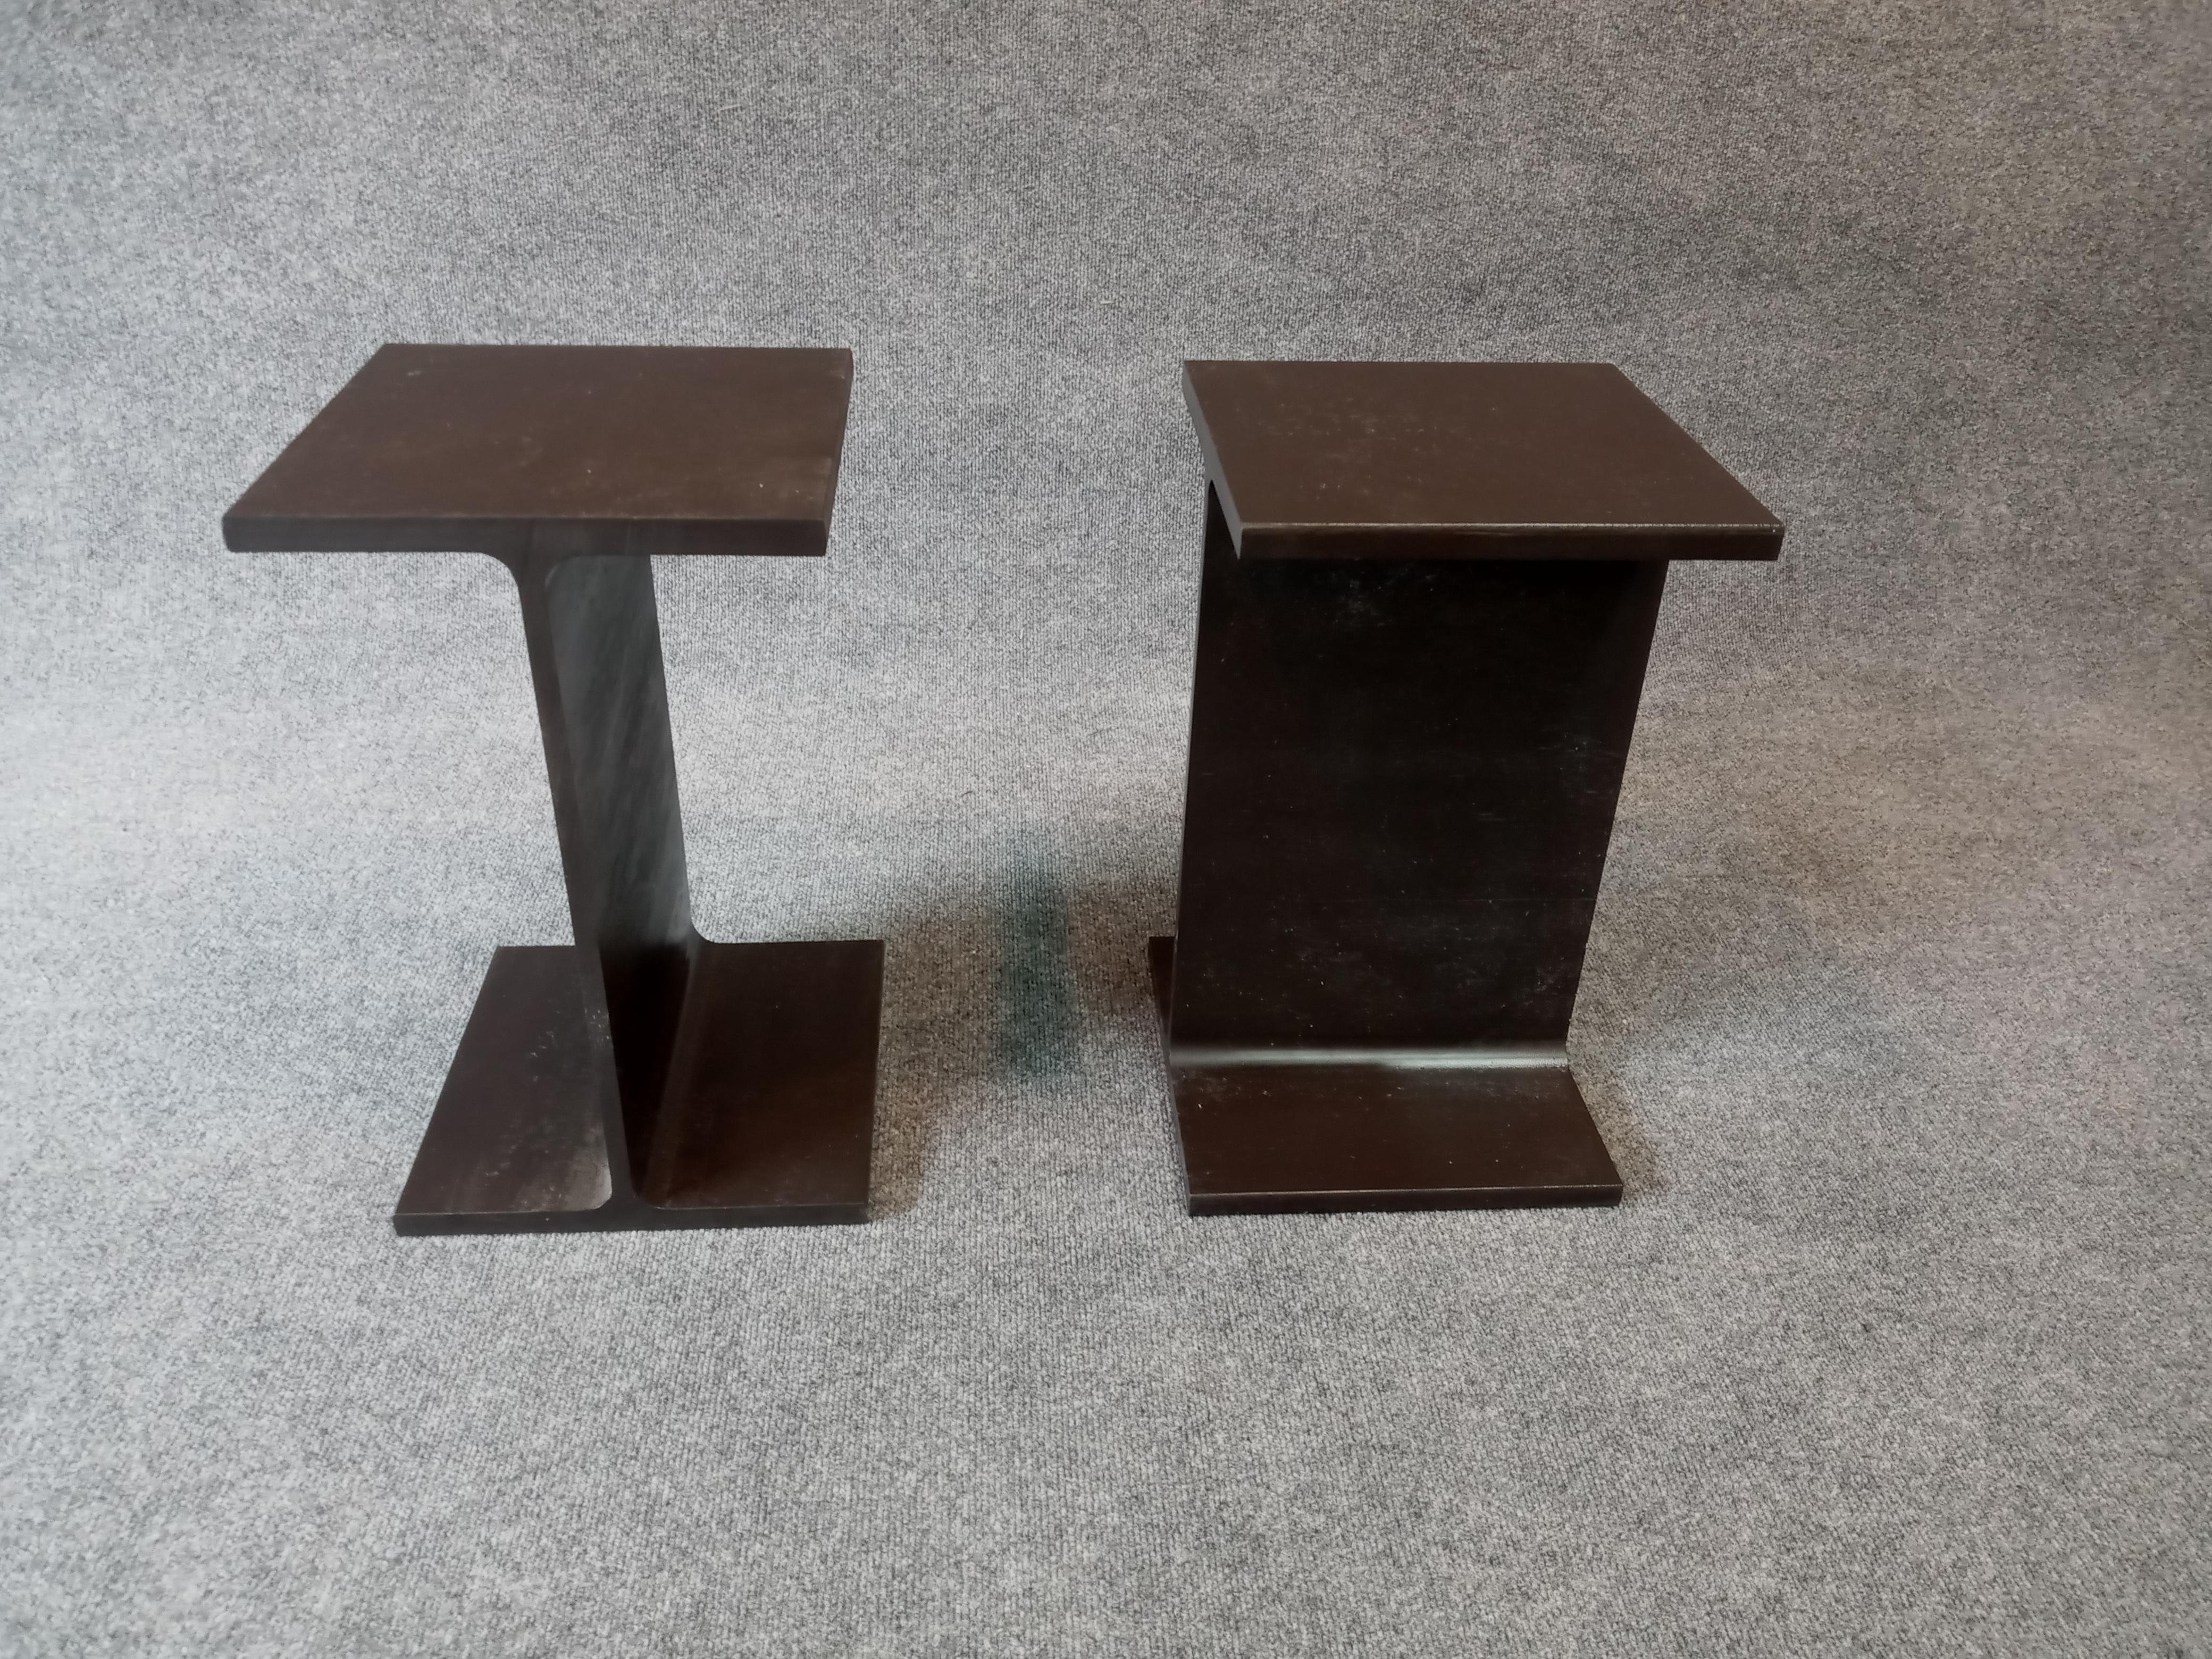 In creating a prototype, Ward Bennett actually cut off a section of a steel I-beam to achieve the raw aesthetic he was after. Here, a pair of solid enameled steel side tables. Each is very well made, with crisp surfaces and edges. A pair of superb